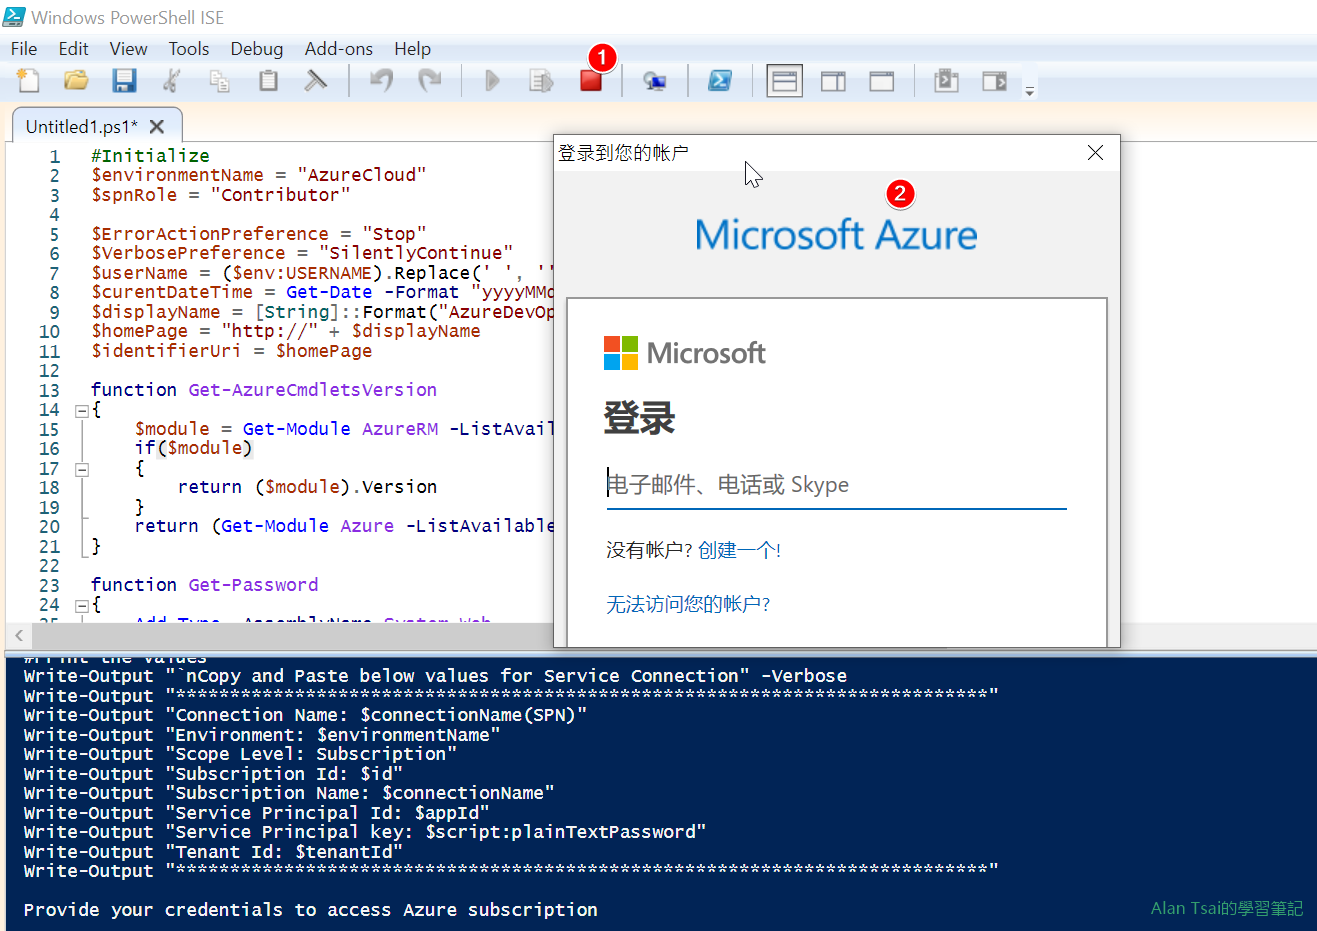 powershell_ise_2019-07-11_20-16-27.png